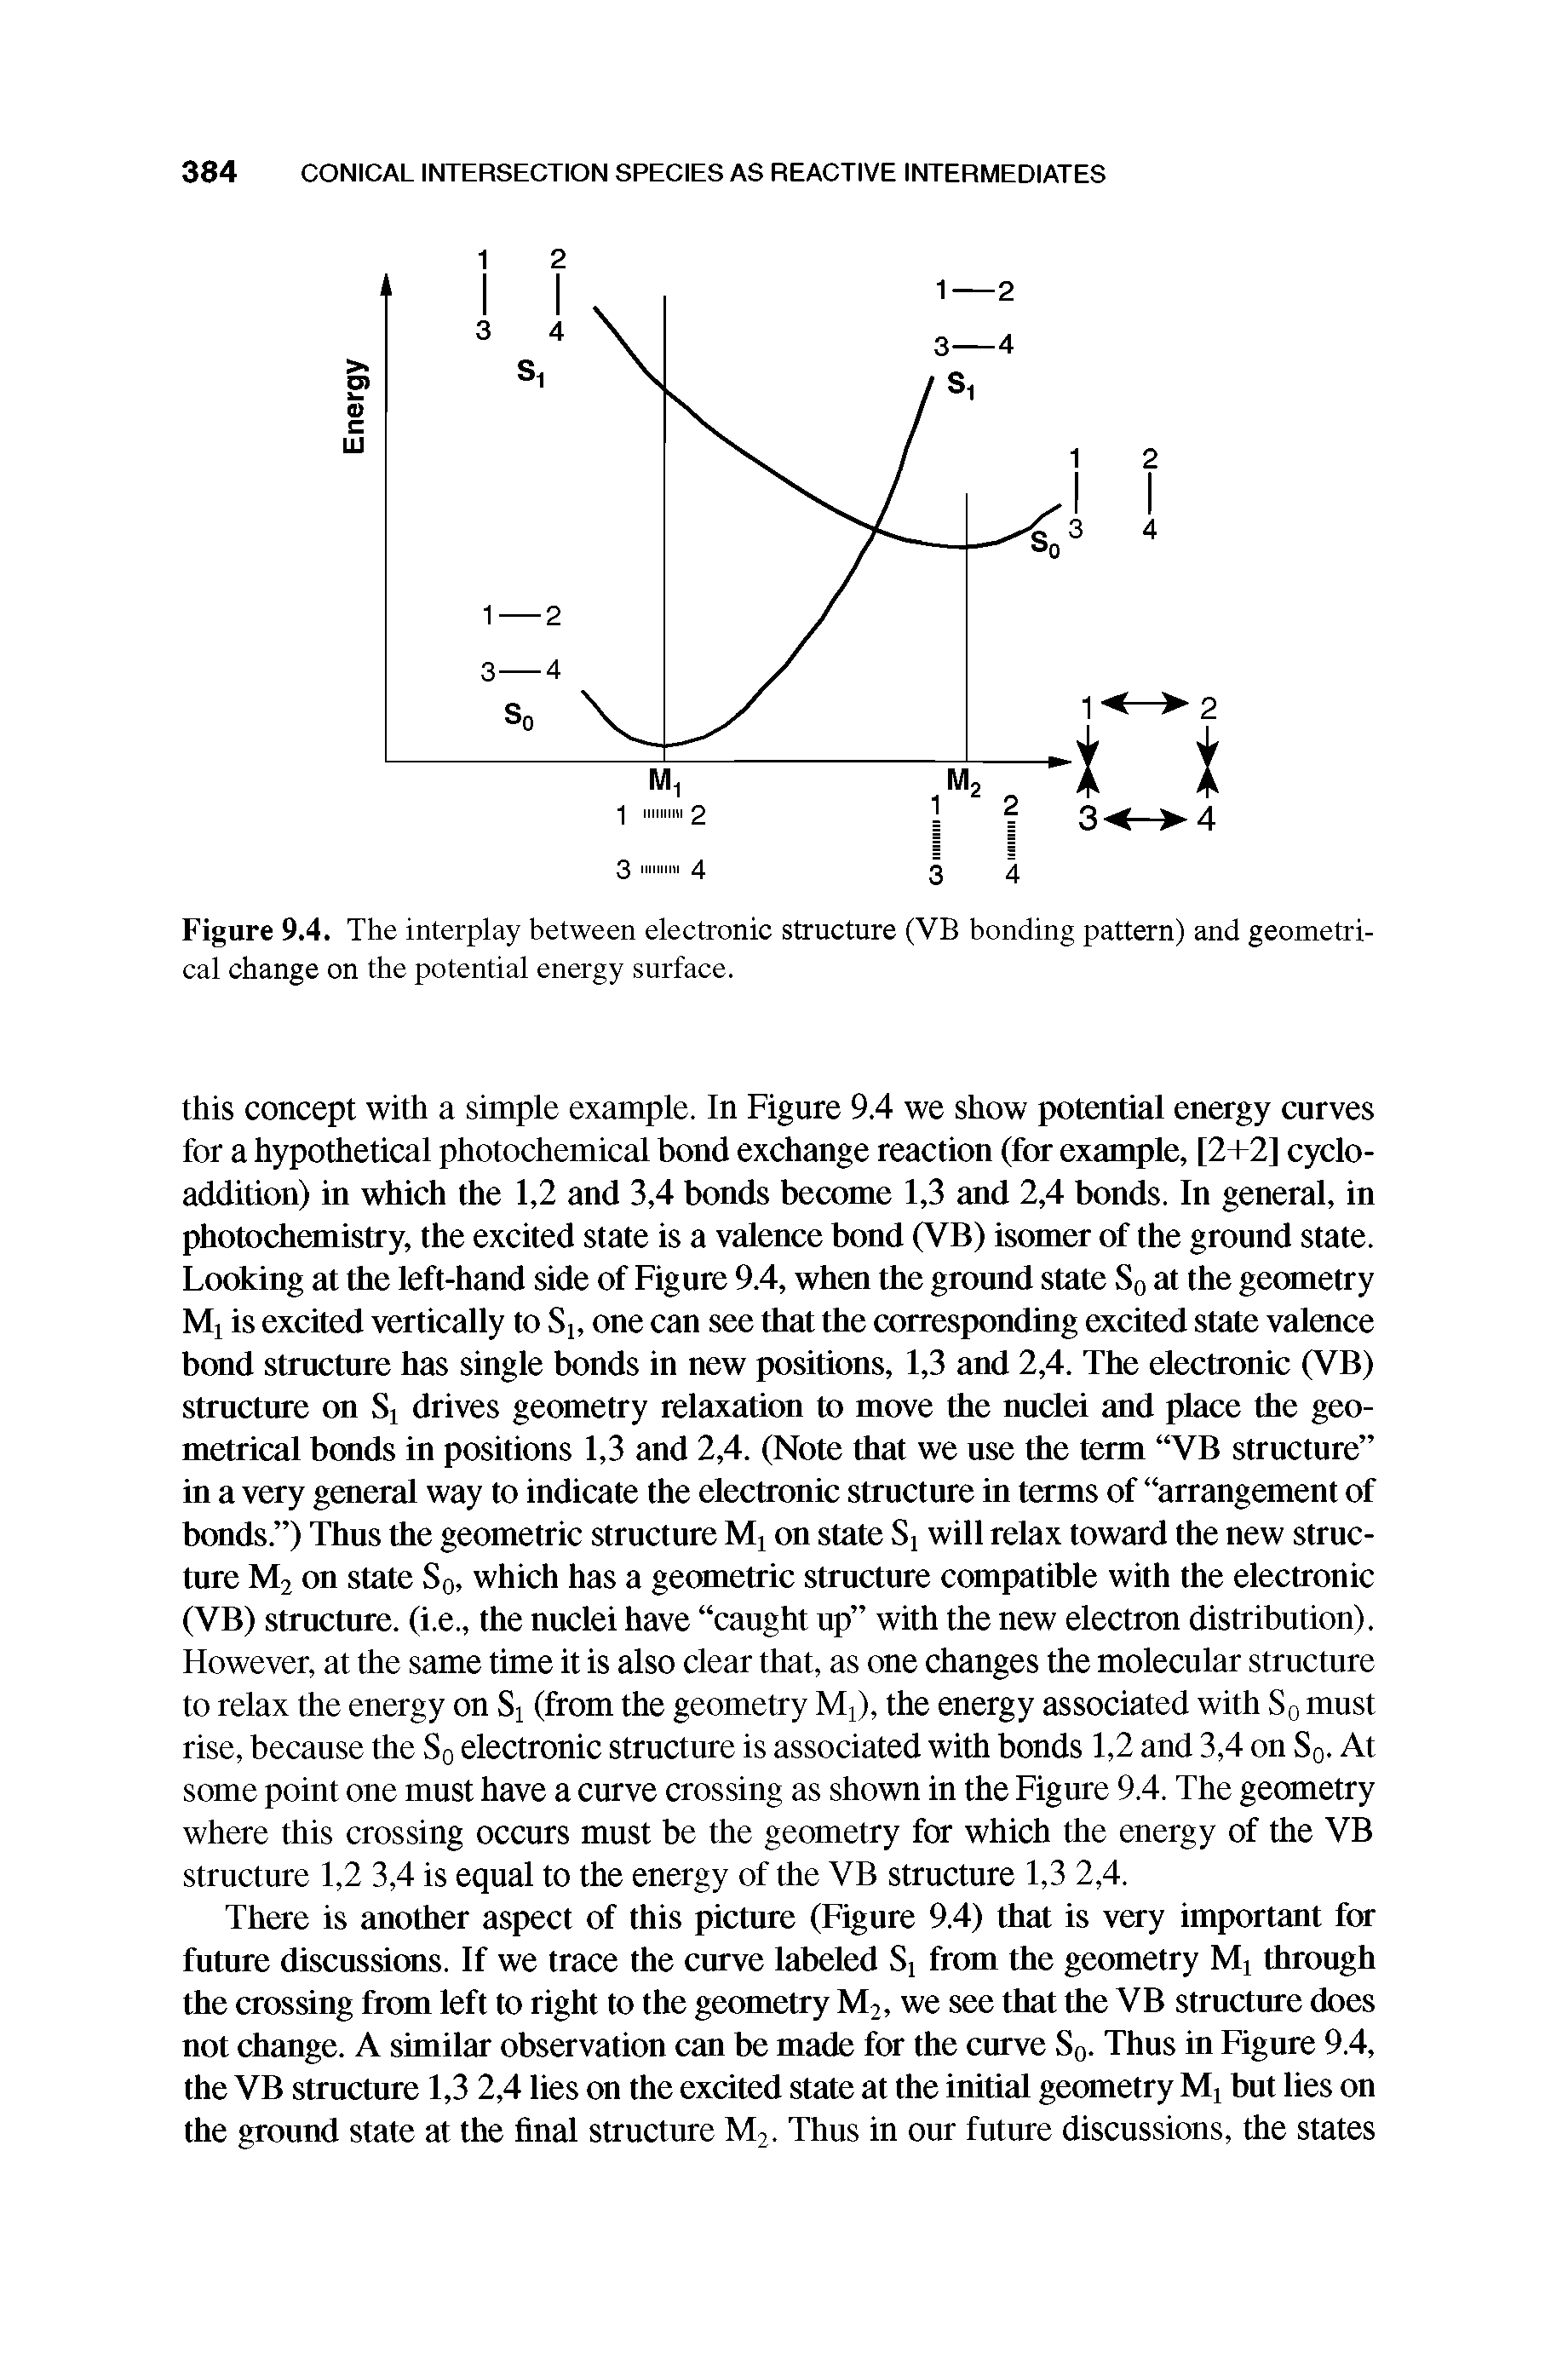 Figure 9.4. The interplay between electronic structure (VB bonding pattern) and geometrical change on the potential energy surface.